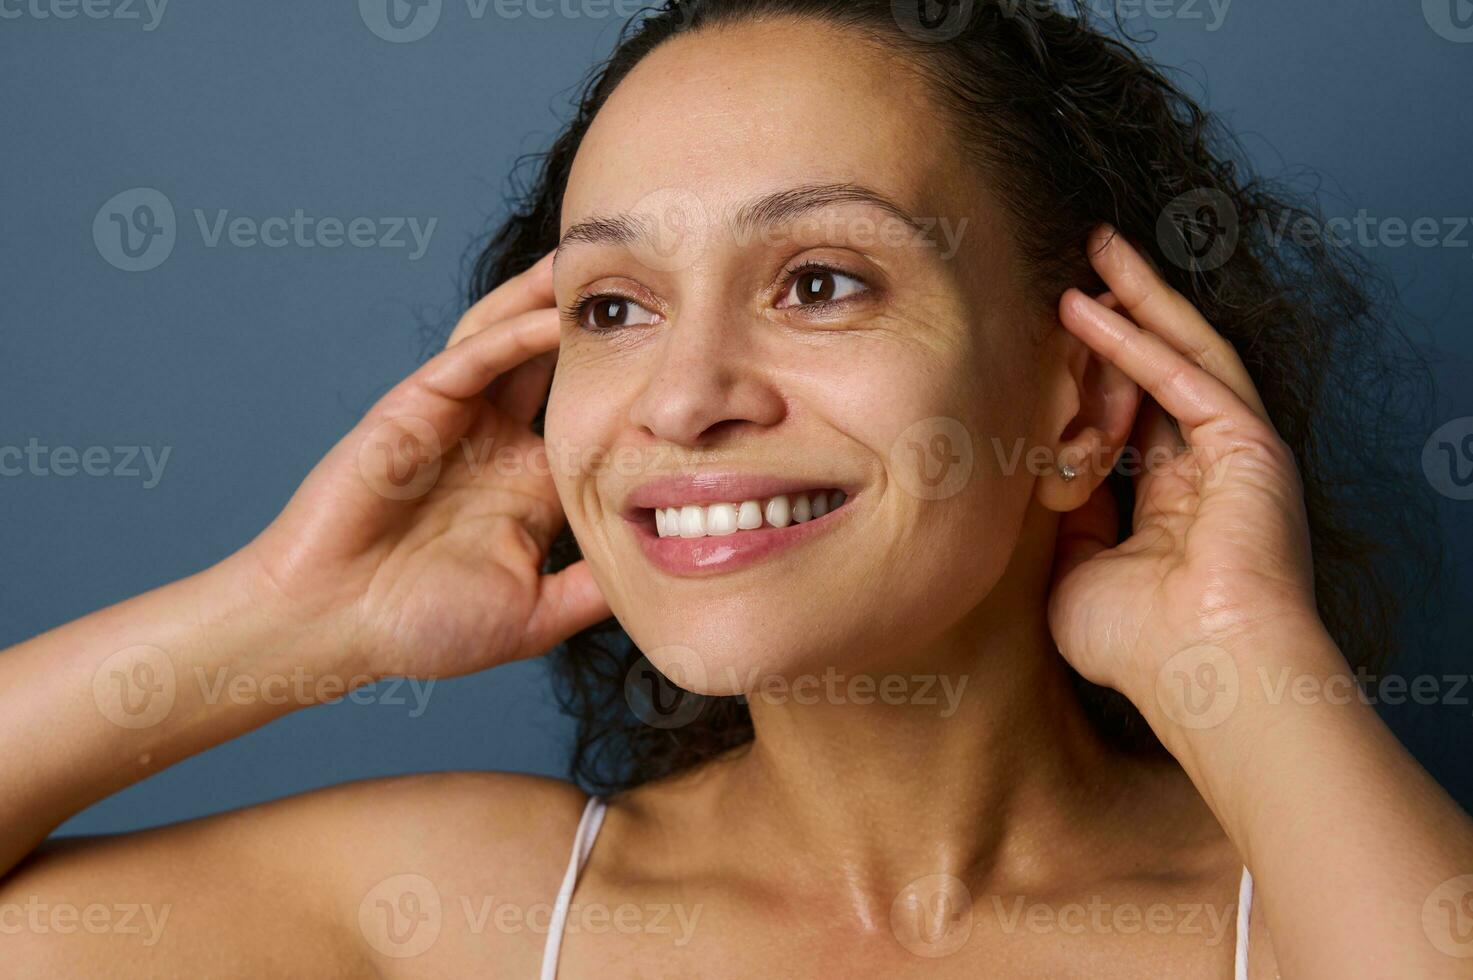 Close-up portrait of middle aged woman with no make-up and wet skin smiles toothy smile while washing her face, taking care of her beauty and skin. Freshness, purity, cleanse, removing make-up concept photo